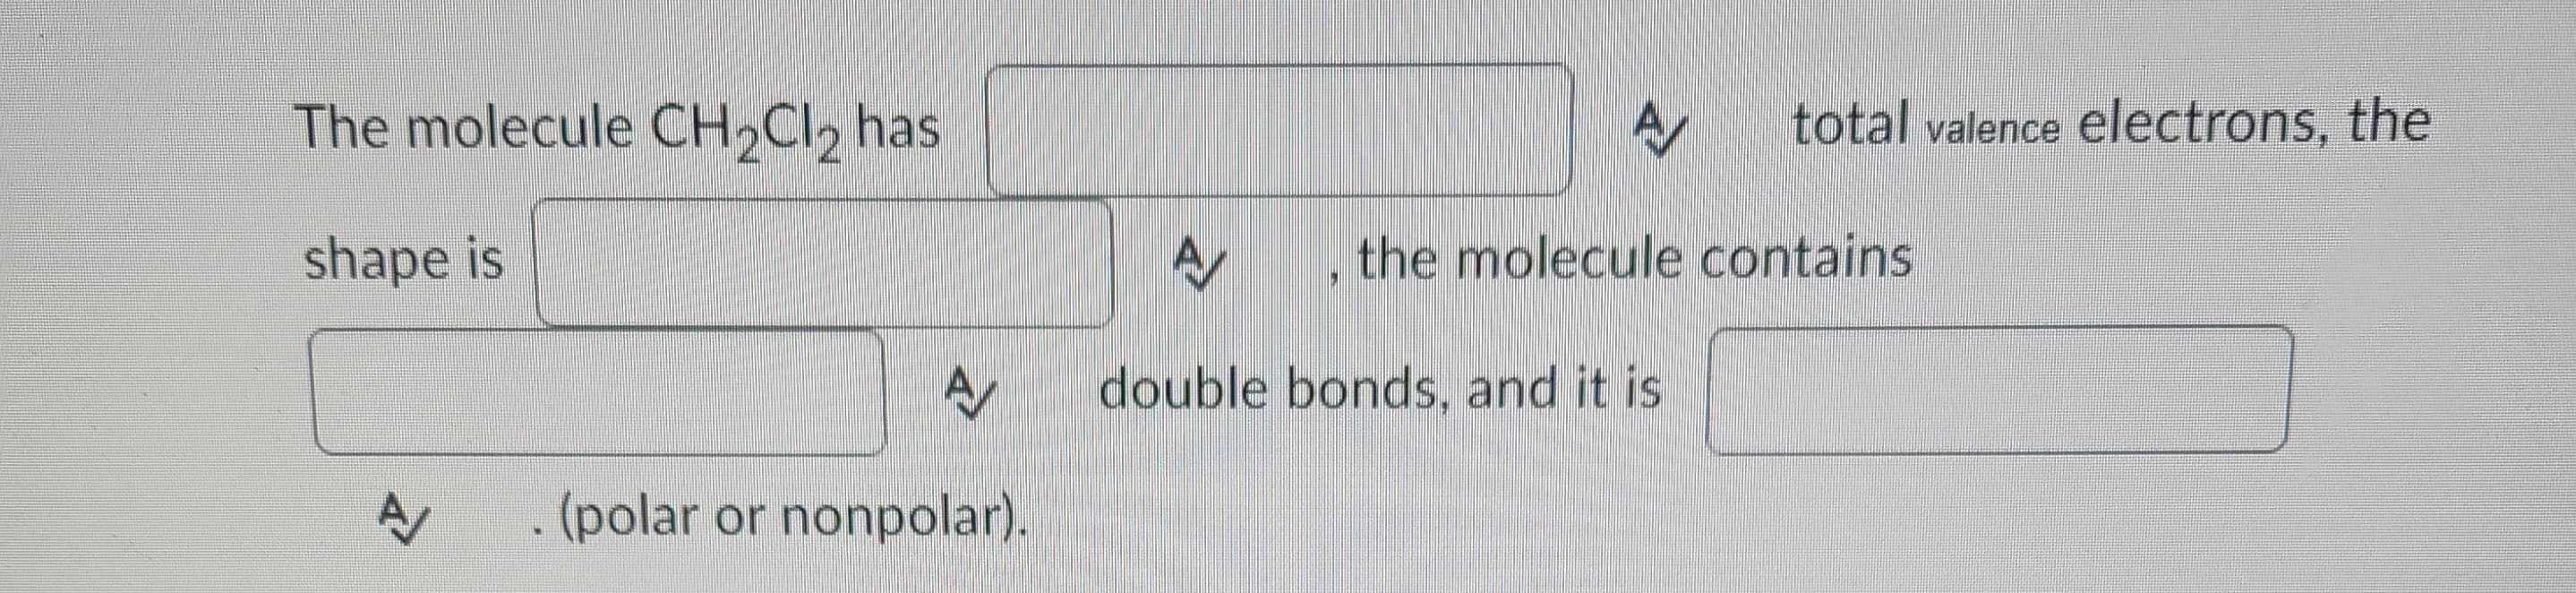 The molecule CH₂Cl₂ has
shape is
A
M
A
(polar or nonpolar).
A
total valence electrons, the
A
double bonds, and it is
the molecule contains